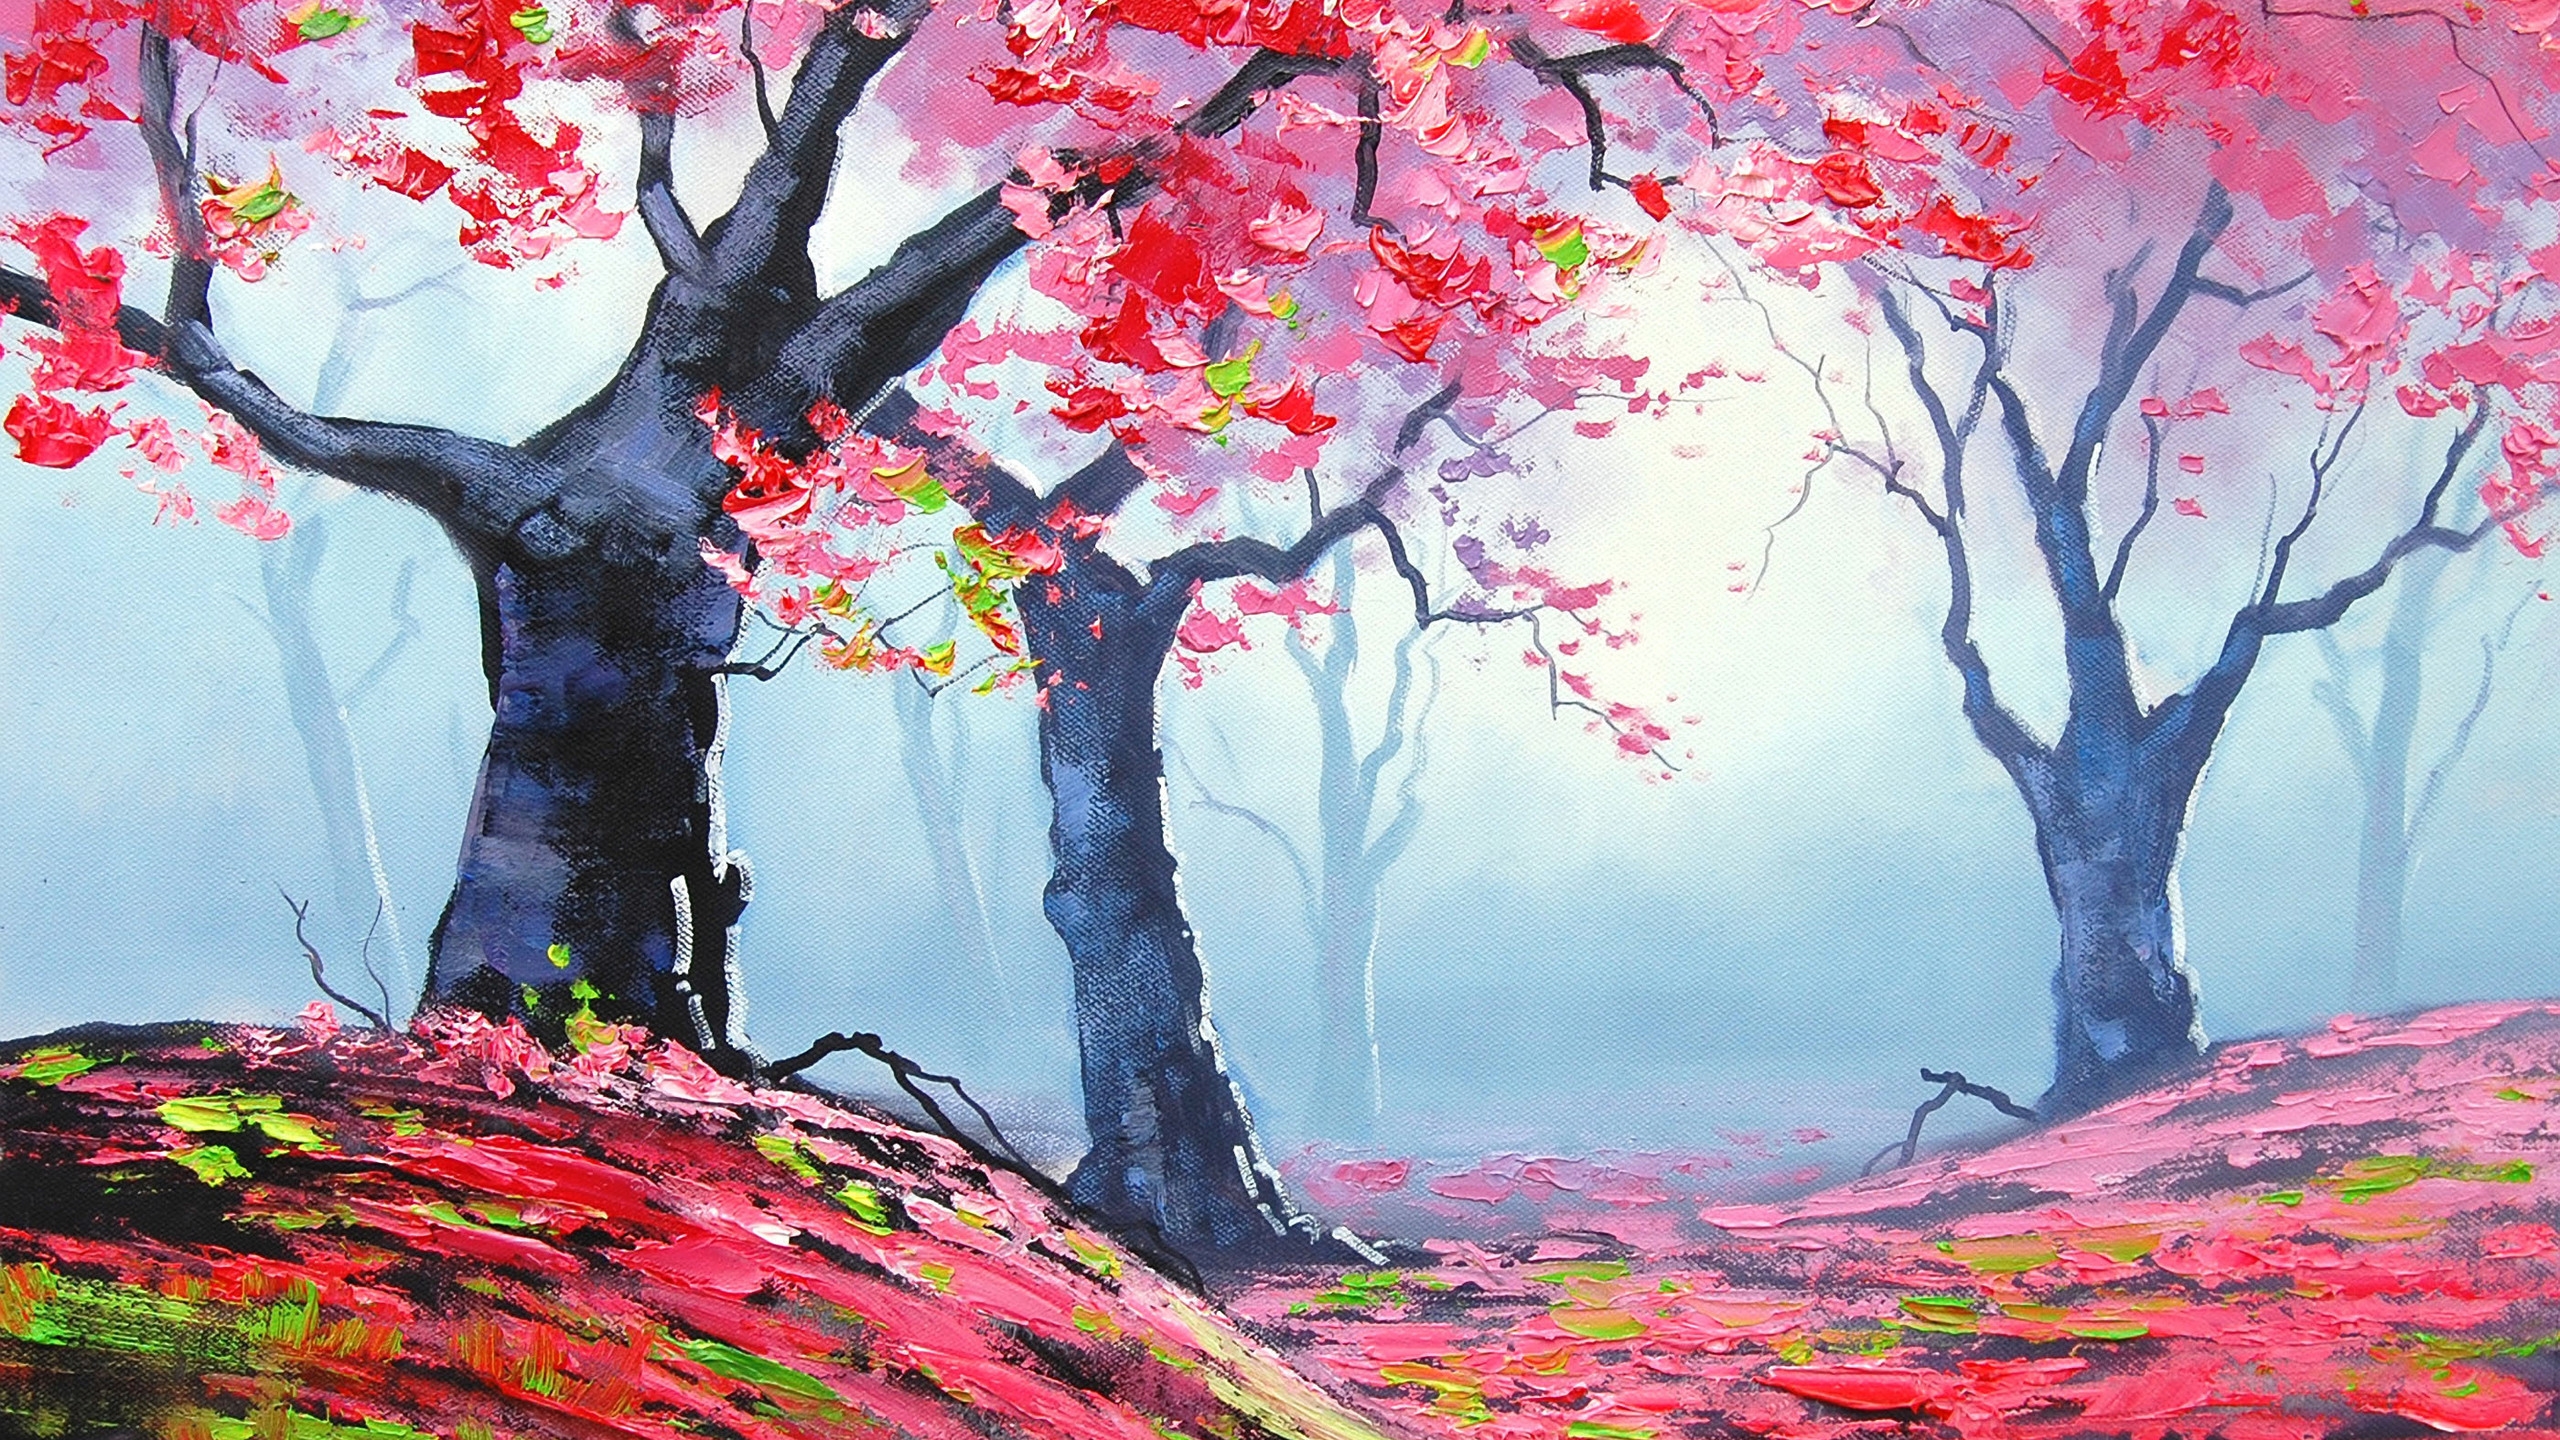 Autumn Red Forest Painting for 2560x1440 HDTV resolution